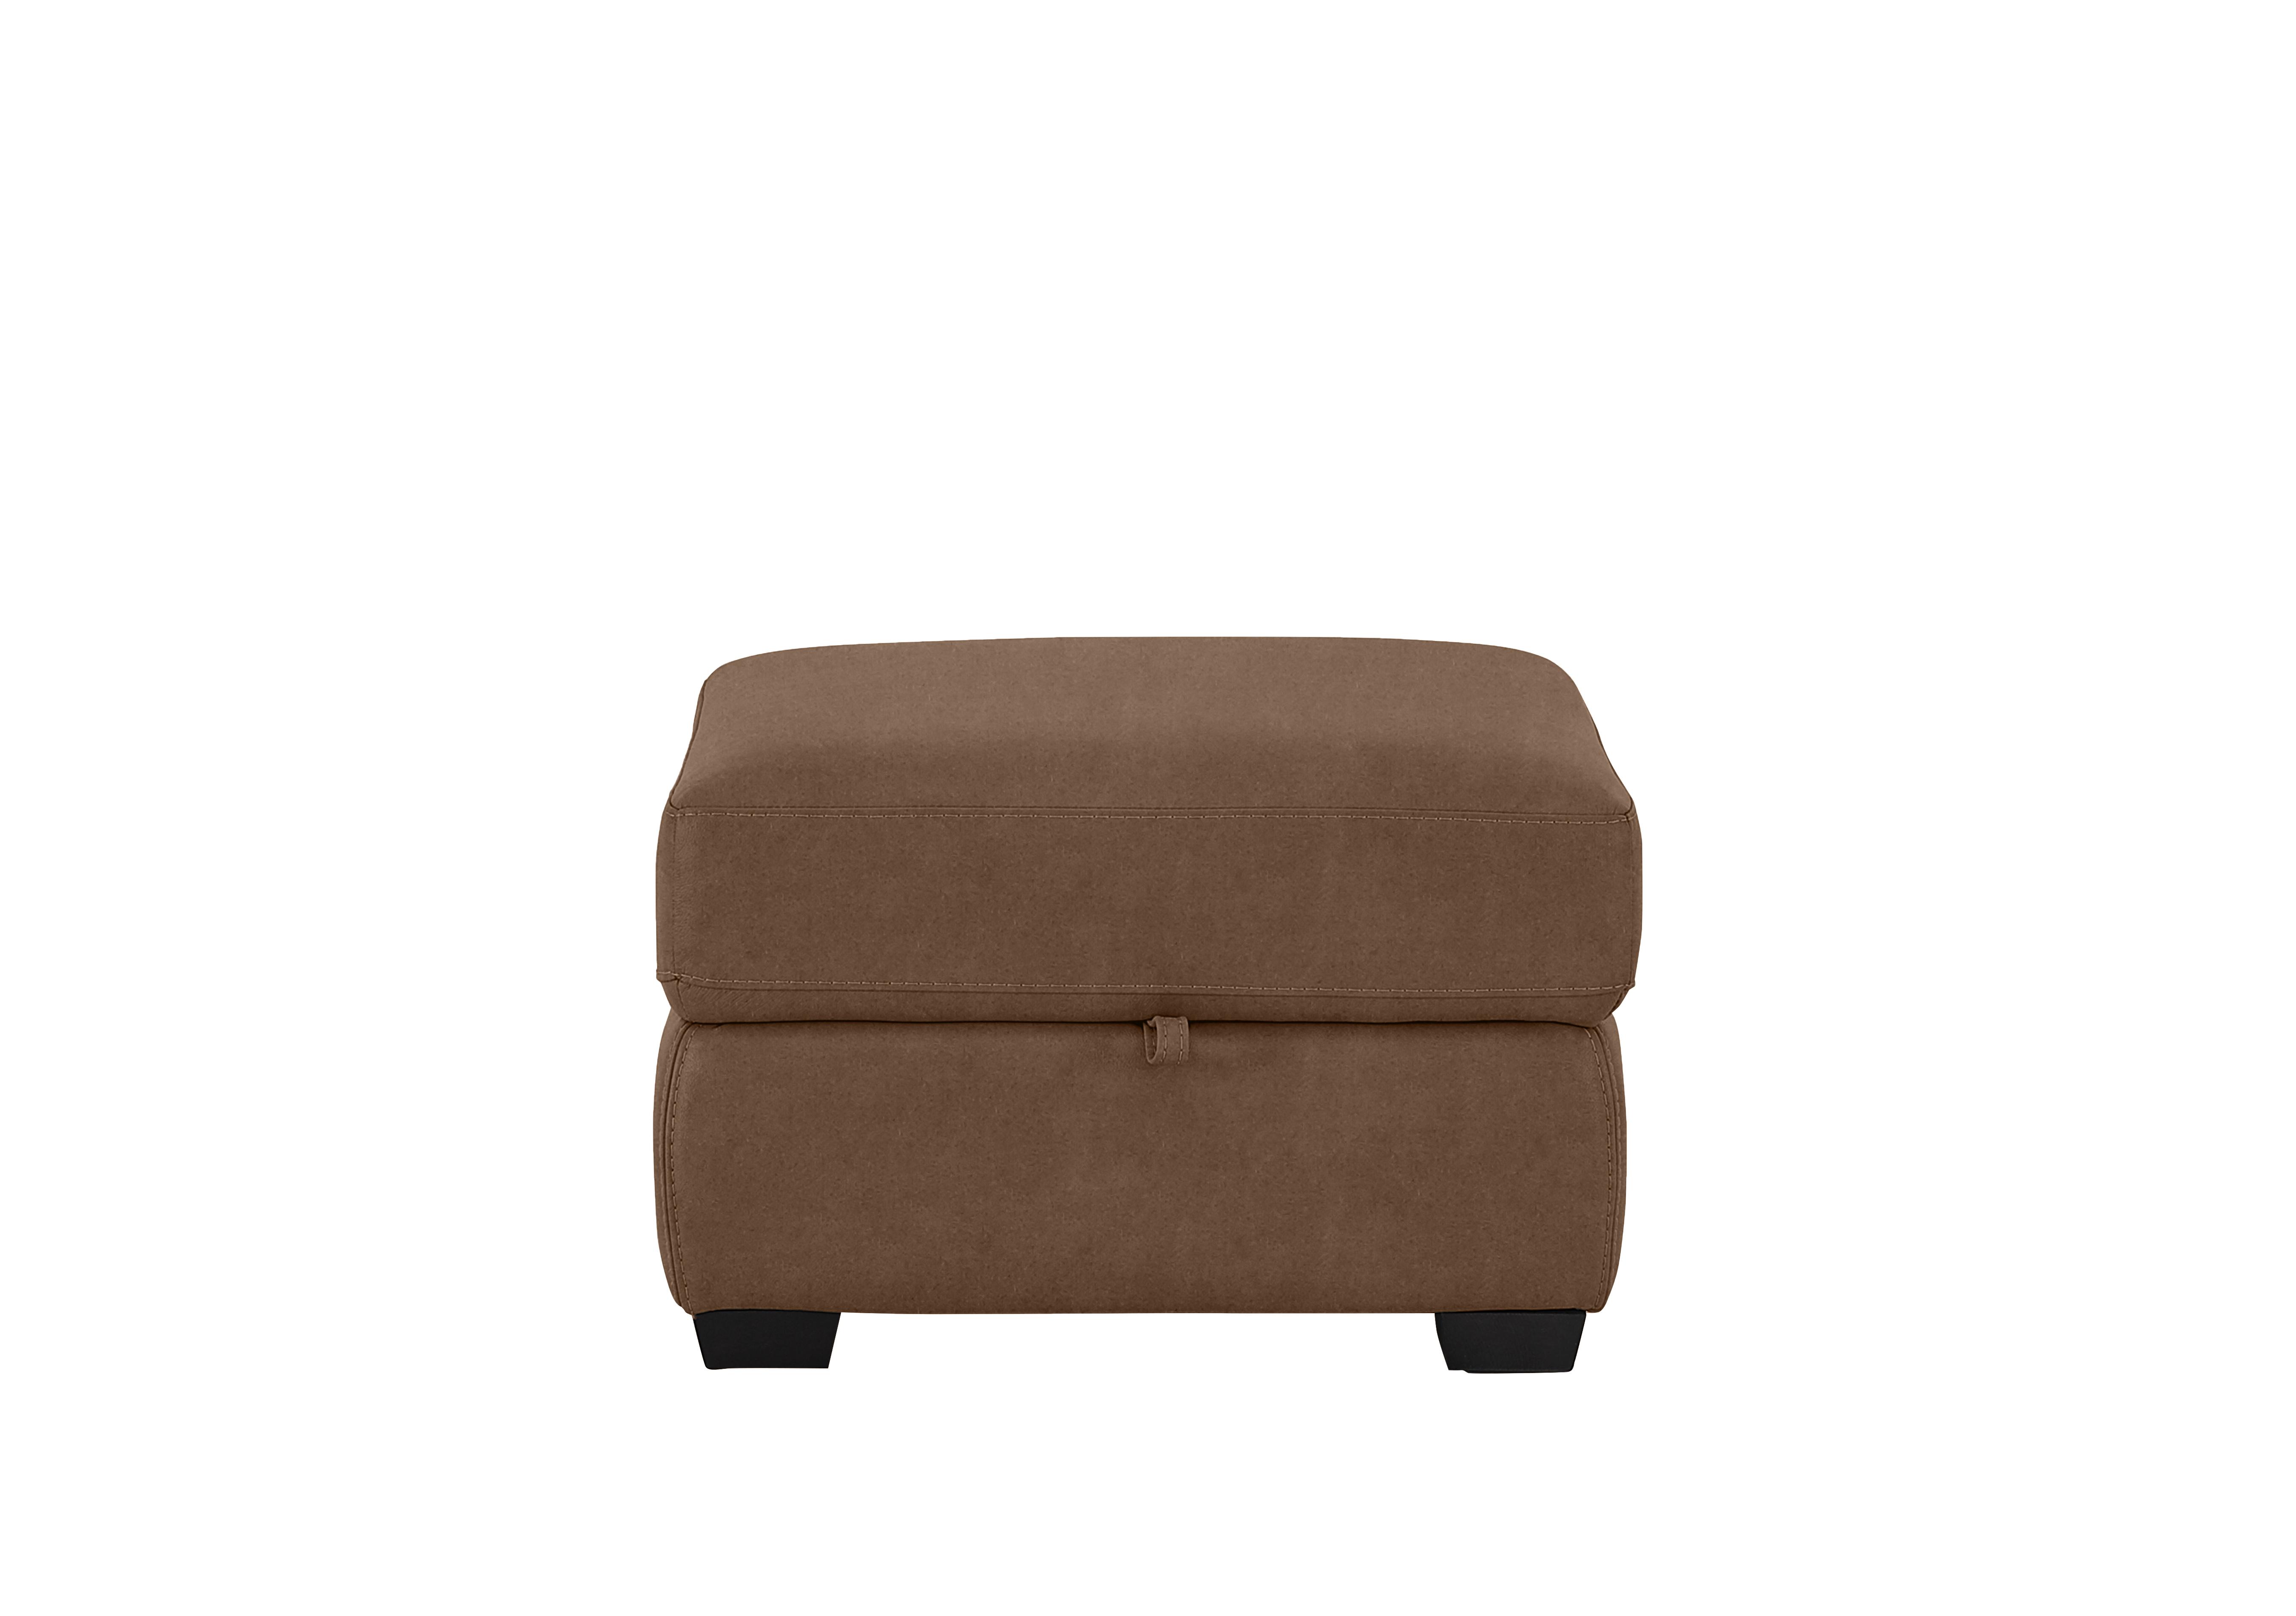 Compact Collection Petit Fabric Storage Footstool in Bfa-Blj-R05 Hazelnut on Furniture Village